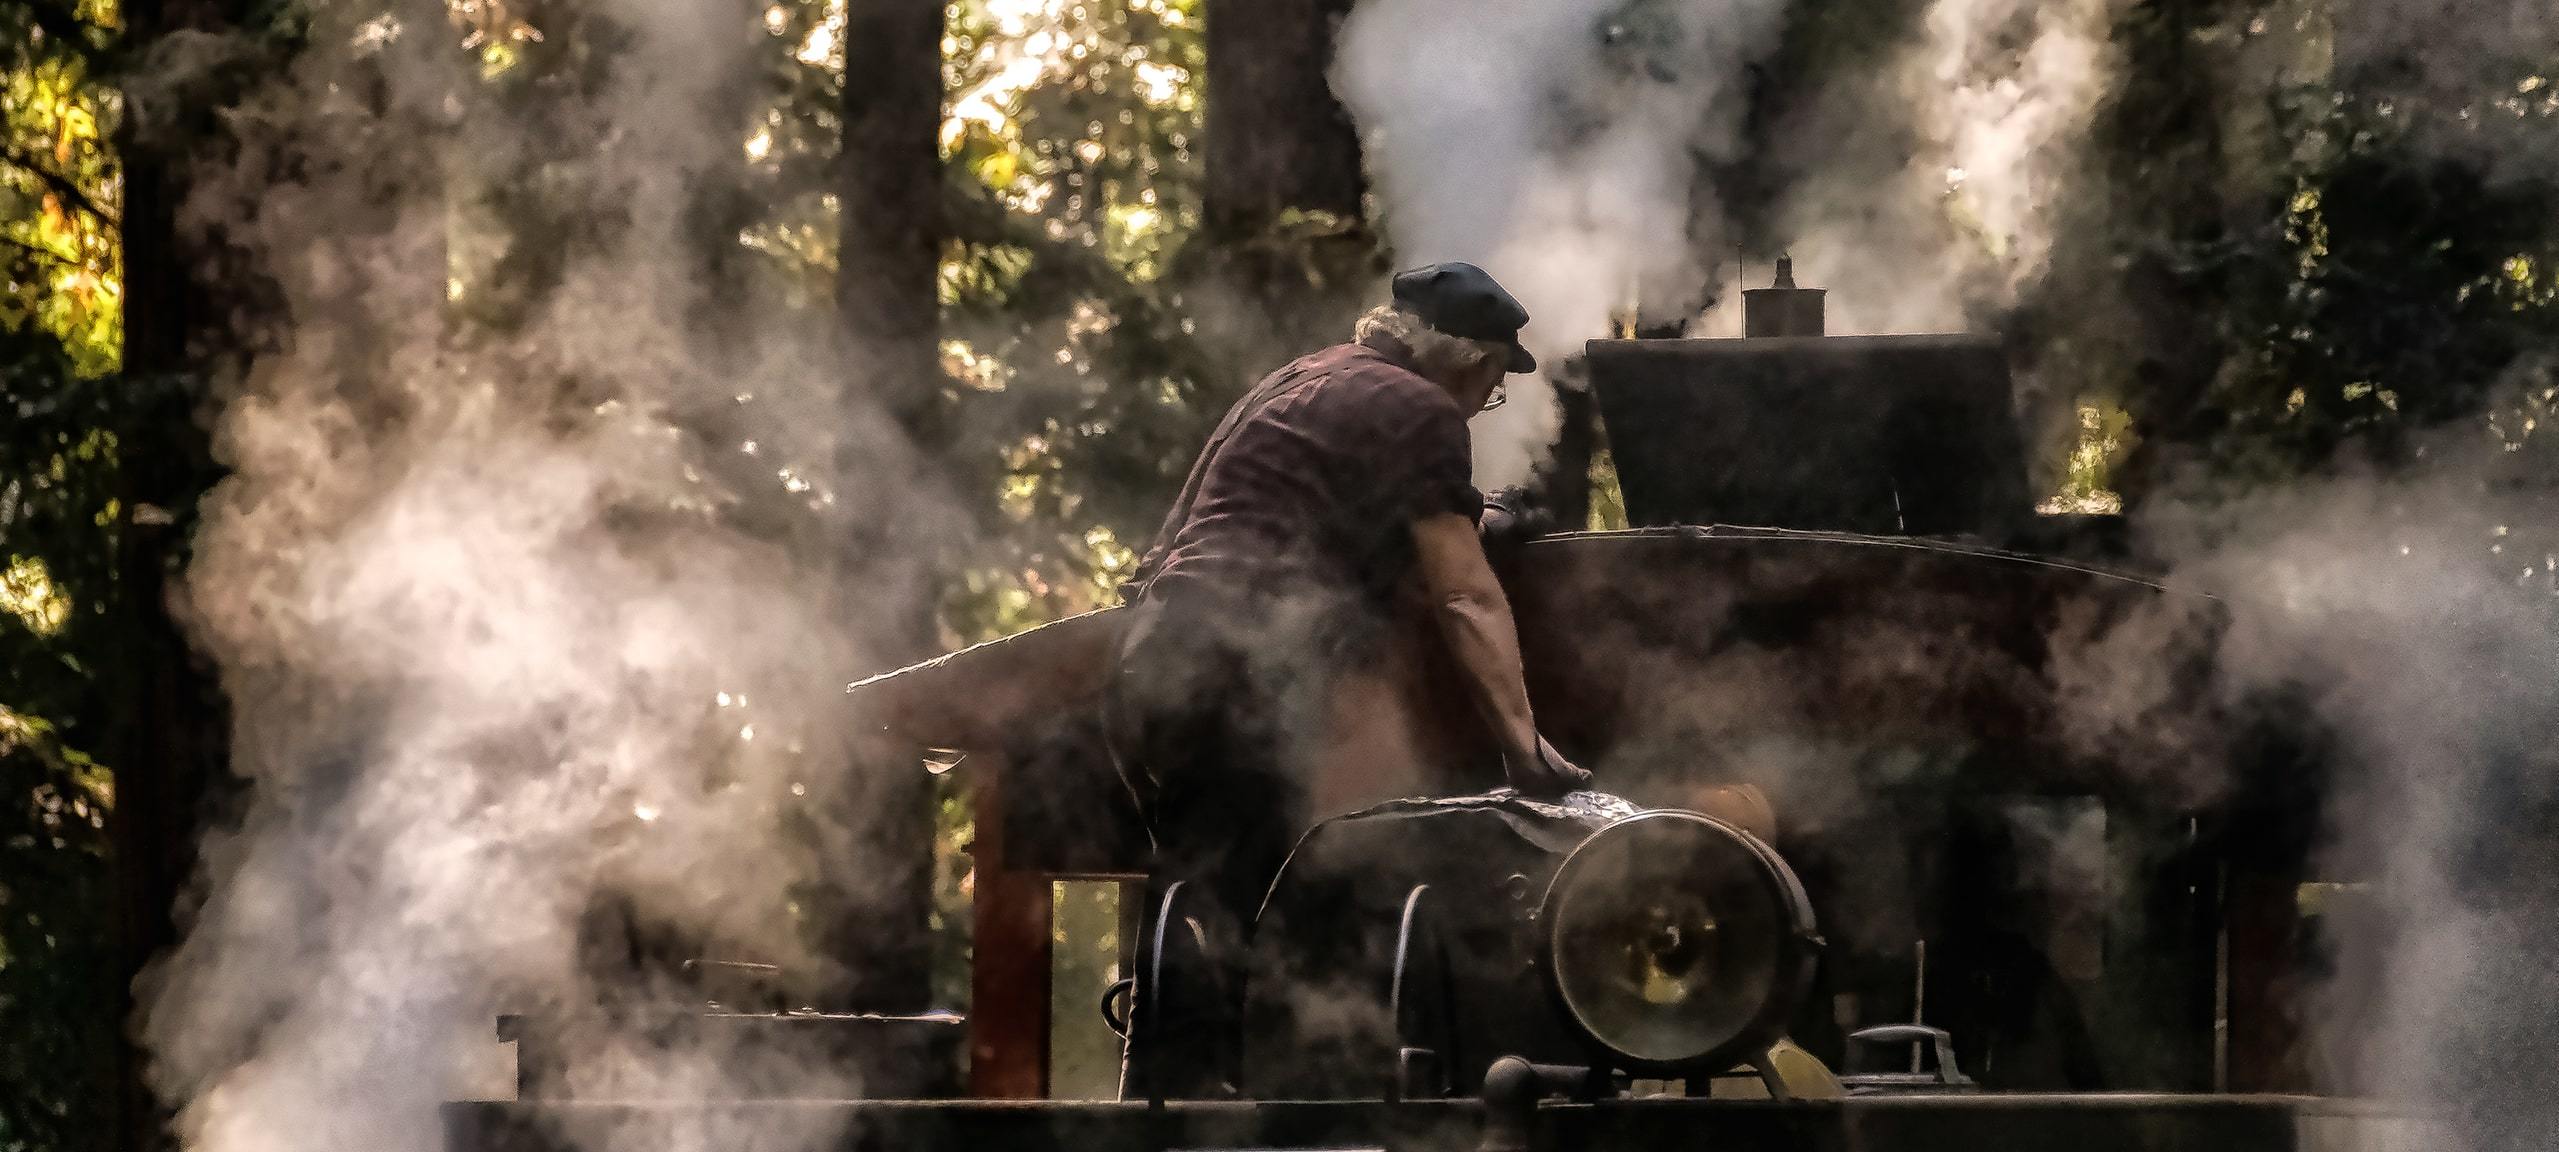 Engineer and steaming forest train at Roaring Camp Railroad, Felton, CA